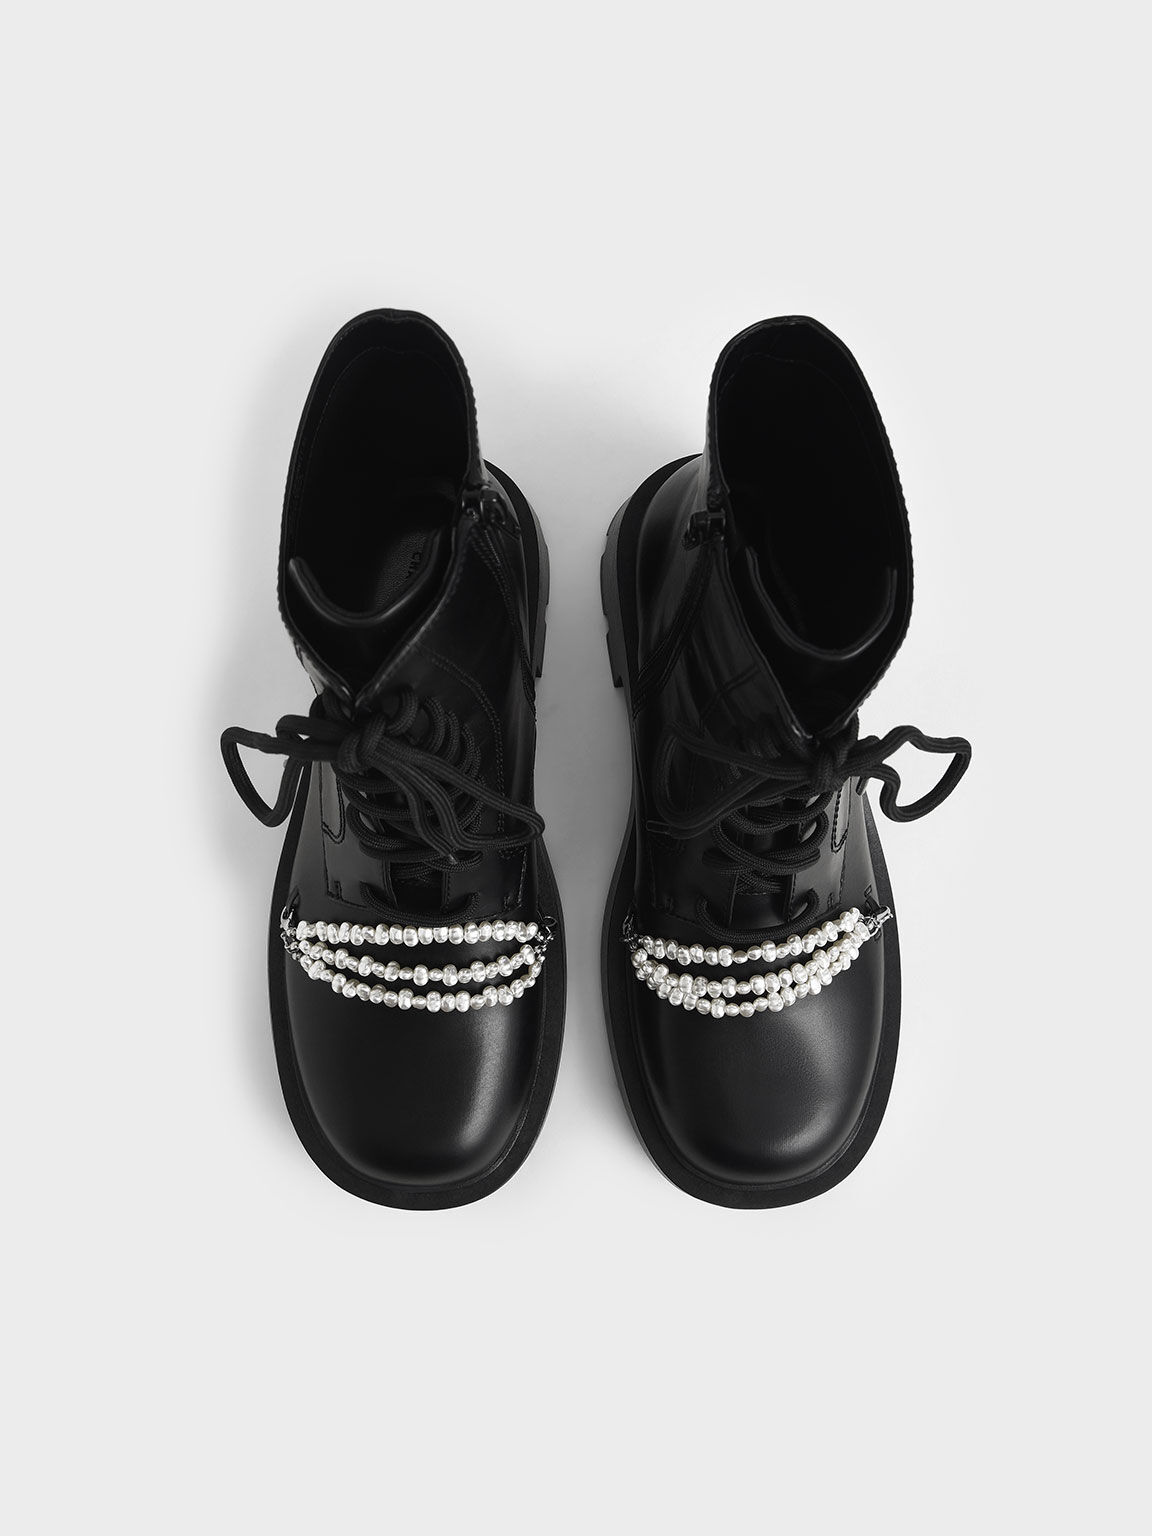 Beaded Lace-Up Ankle Boots, Black, hi-res